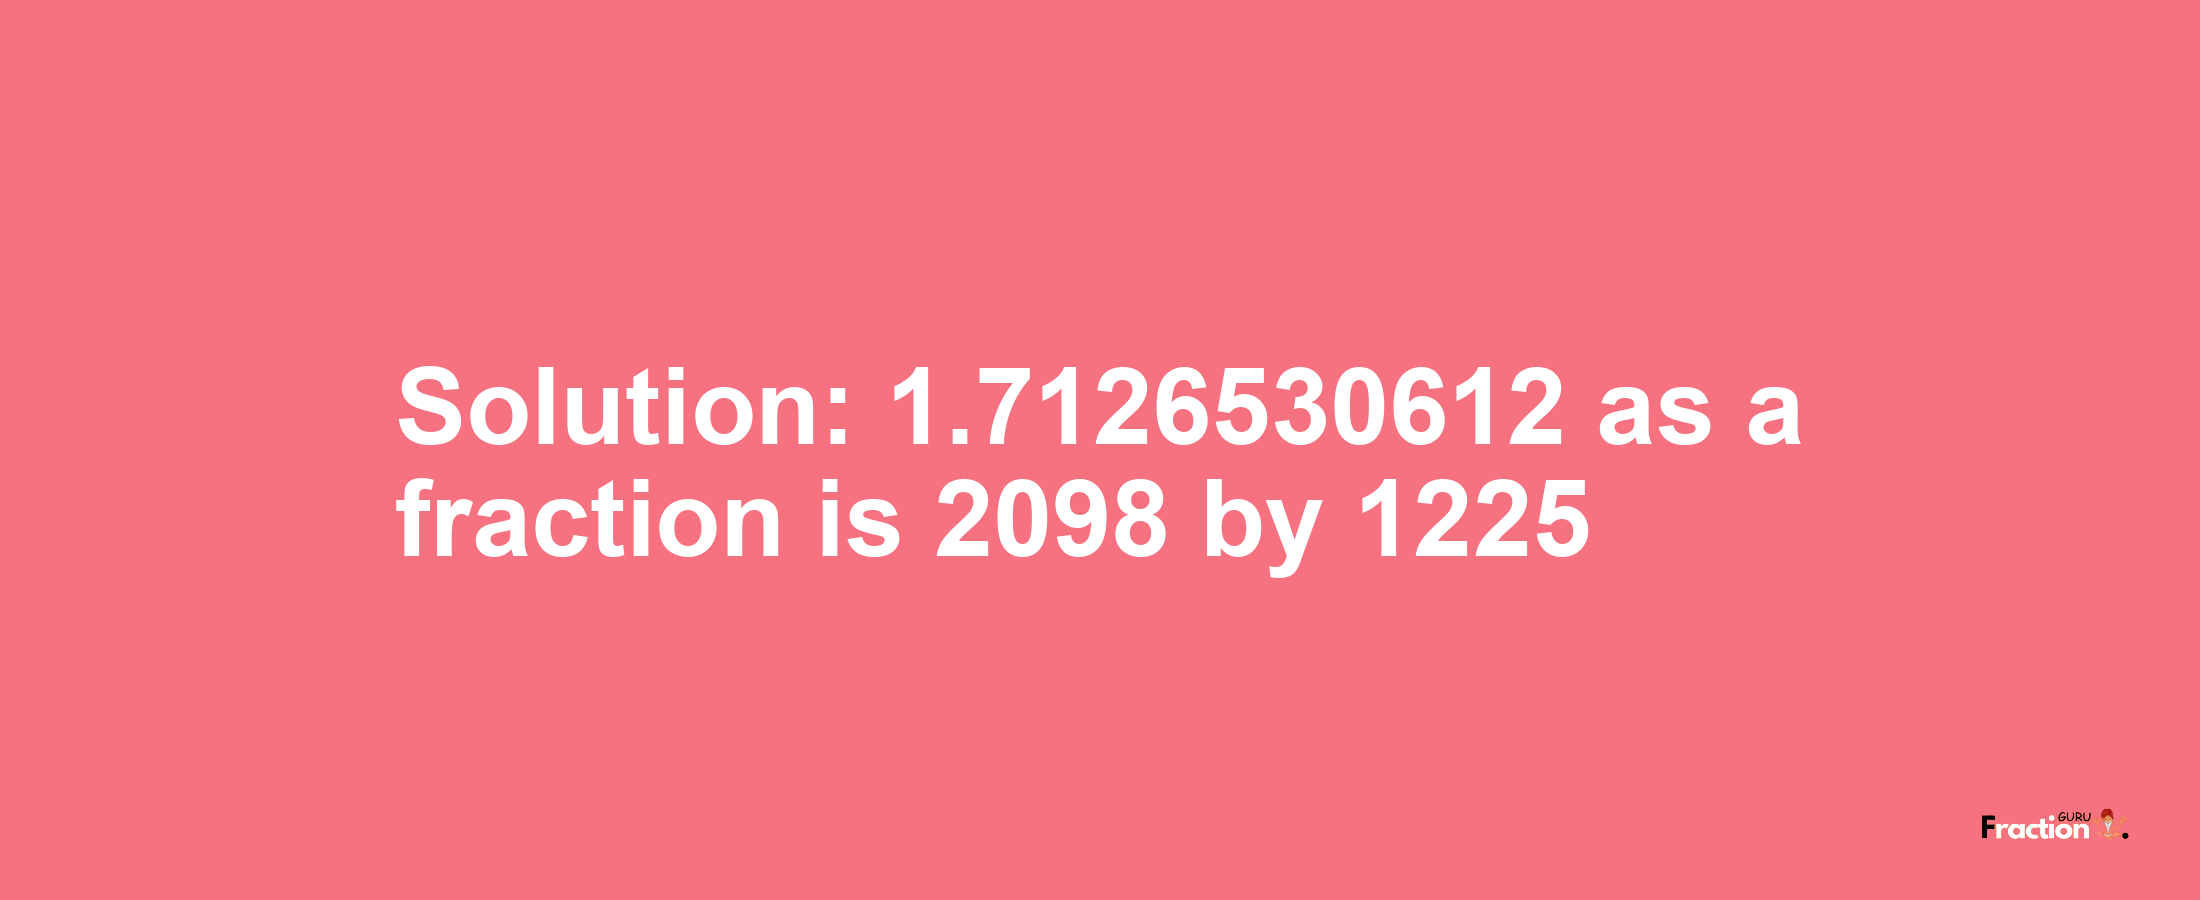 Solution:1.7126530612 as a fraction is 2098/1225